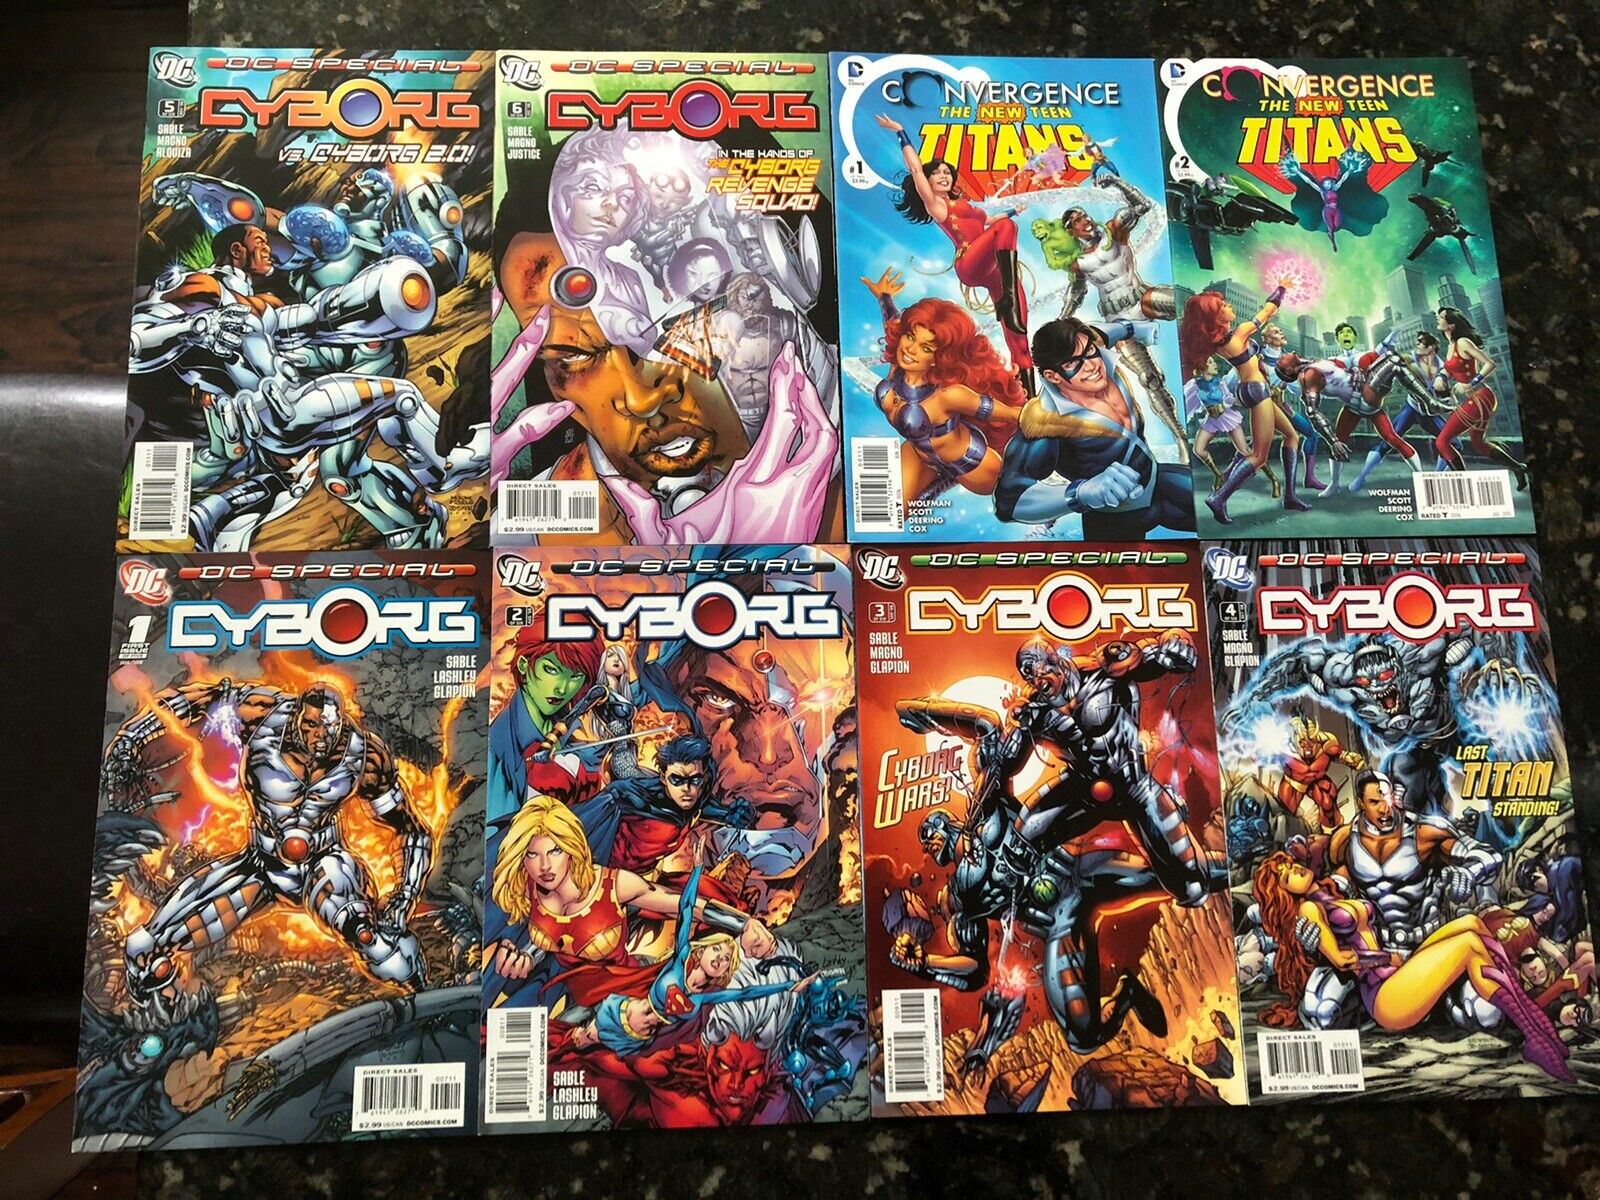 Cyborg 1-6 2008, Convergence New Teen Titans 1-2 Complete Miniseries 1 2 3 4 5 6